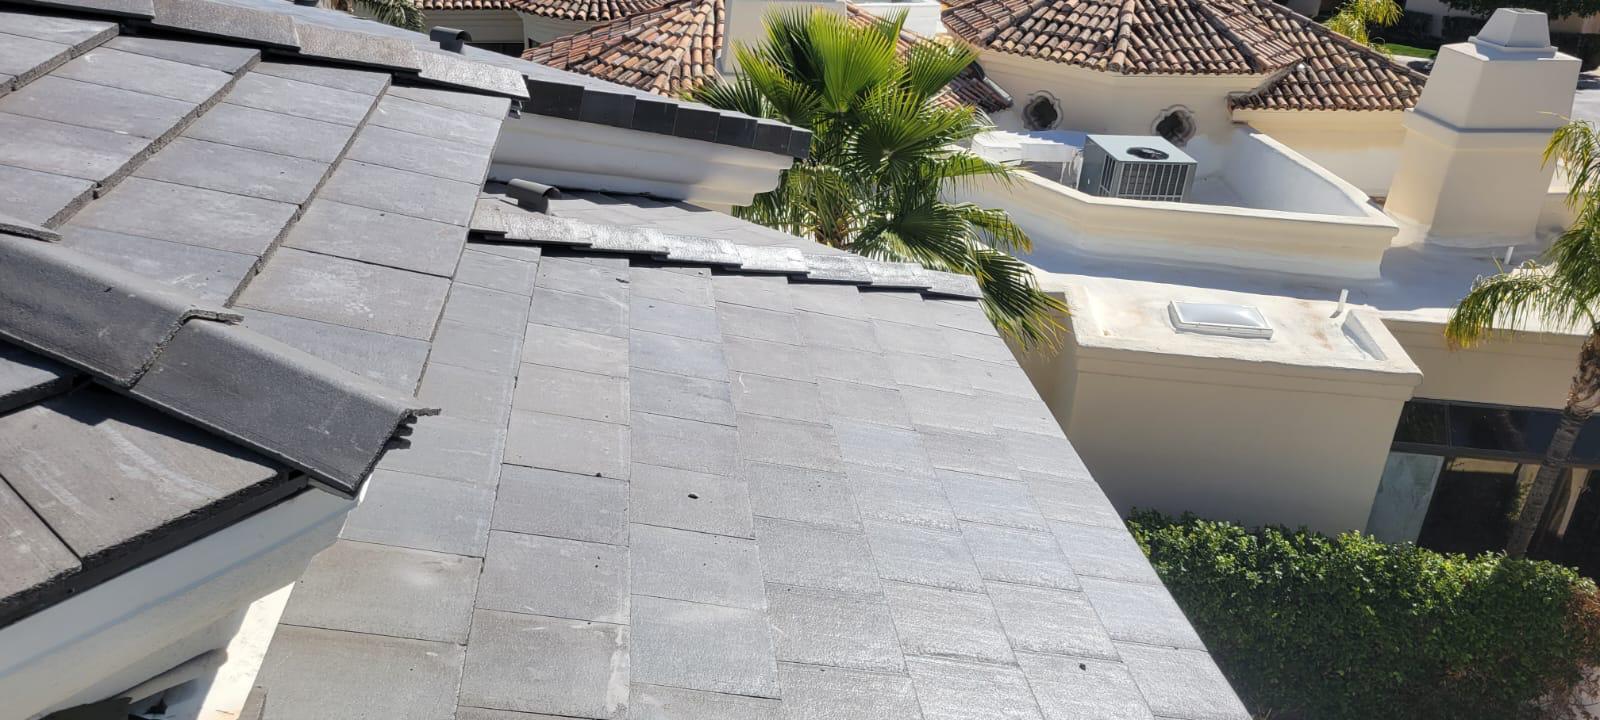 A house in Glendale with a black tile roof undergoes re-roofing.